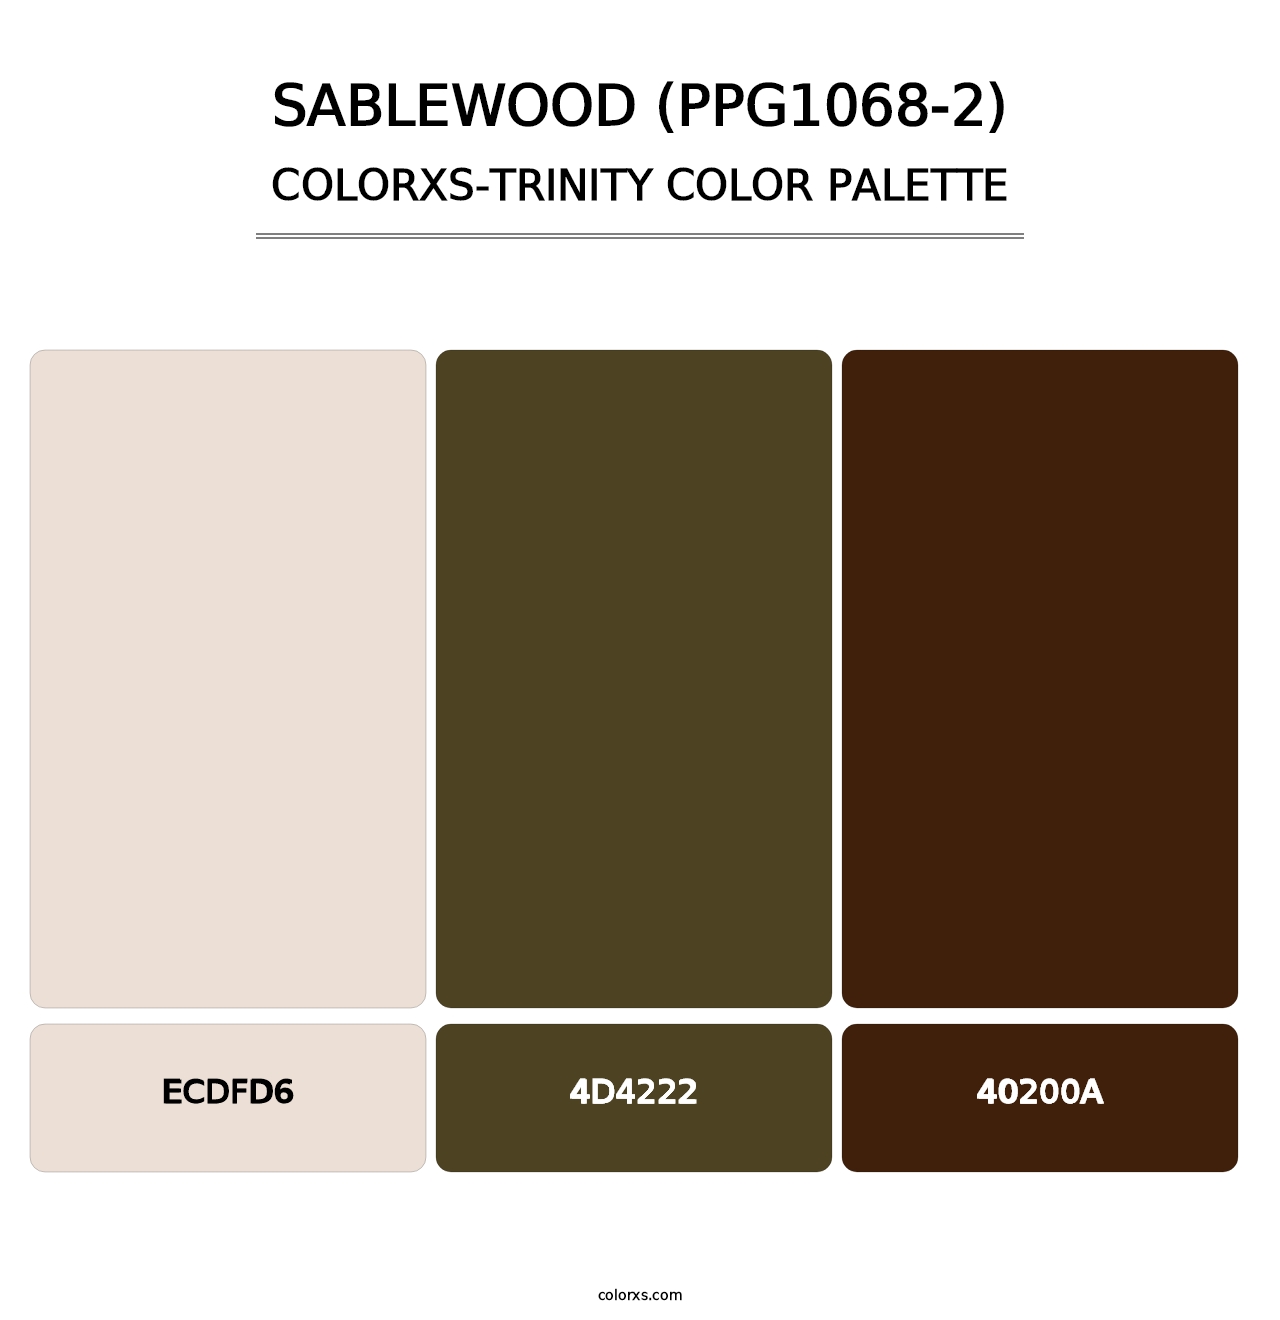 Sablewood (PPG1068-2) - Colorxs Trinity Palette